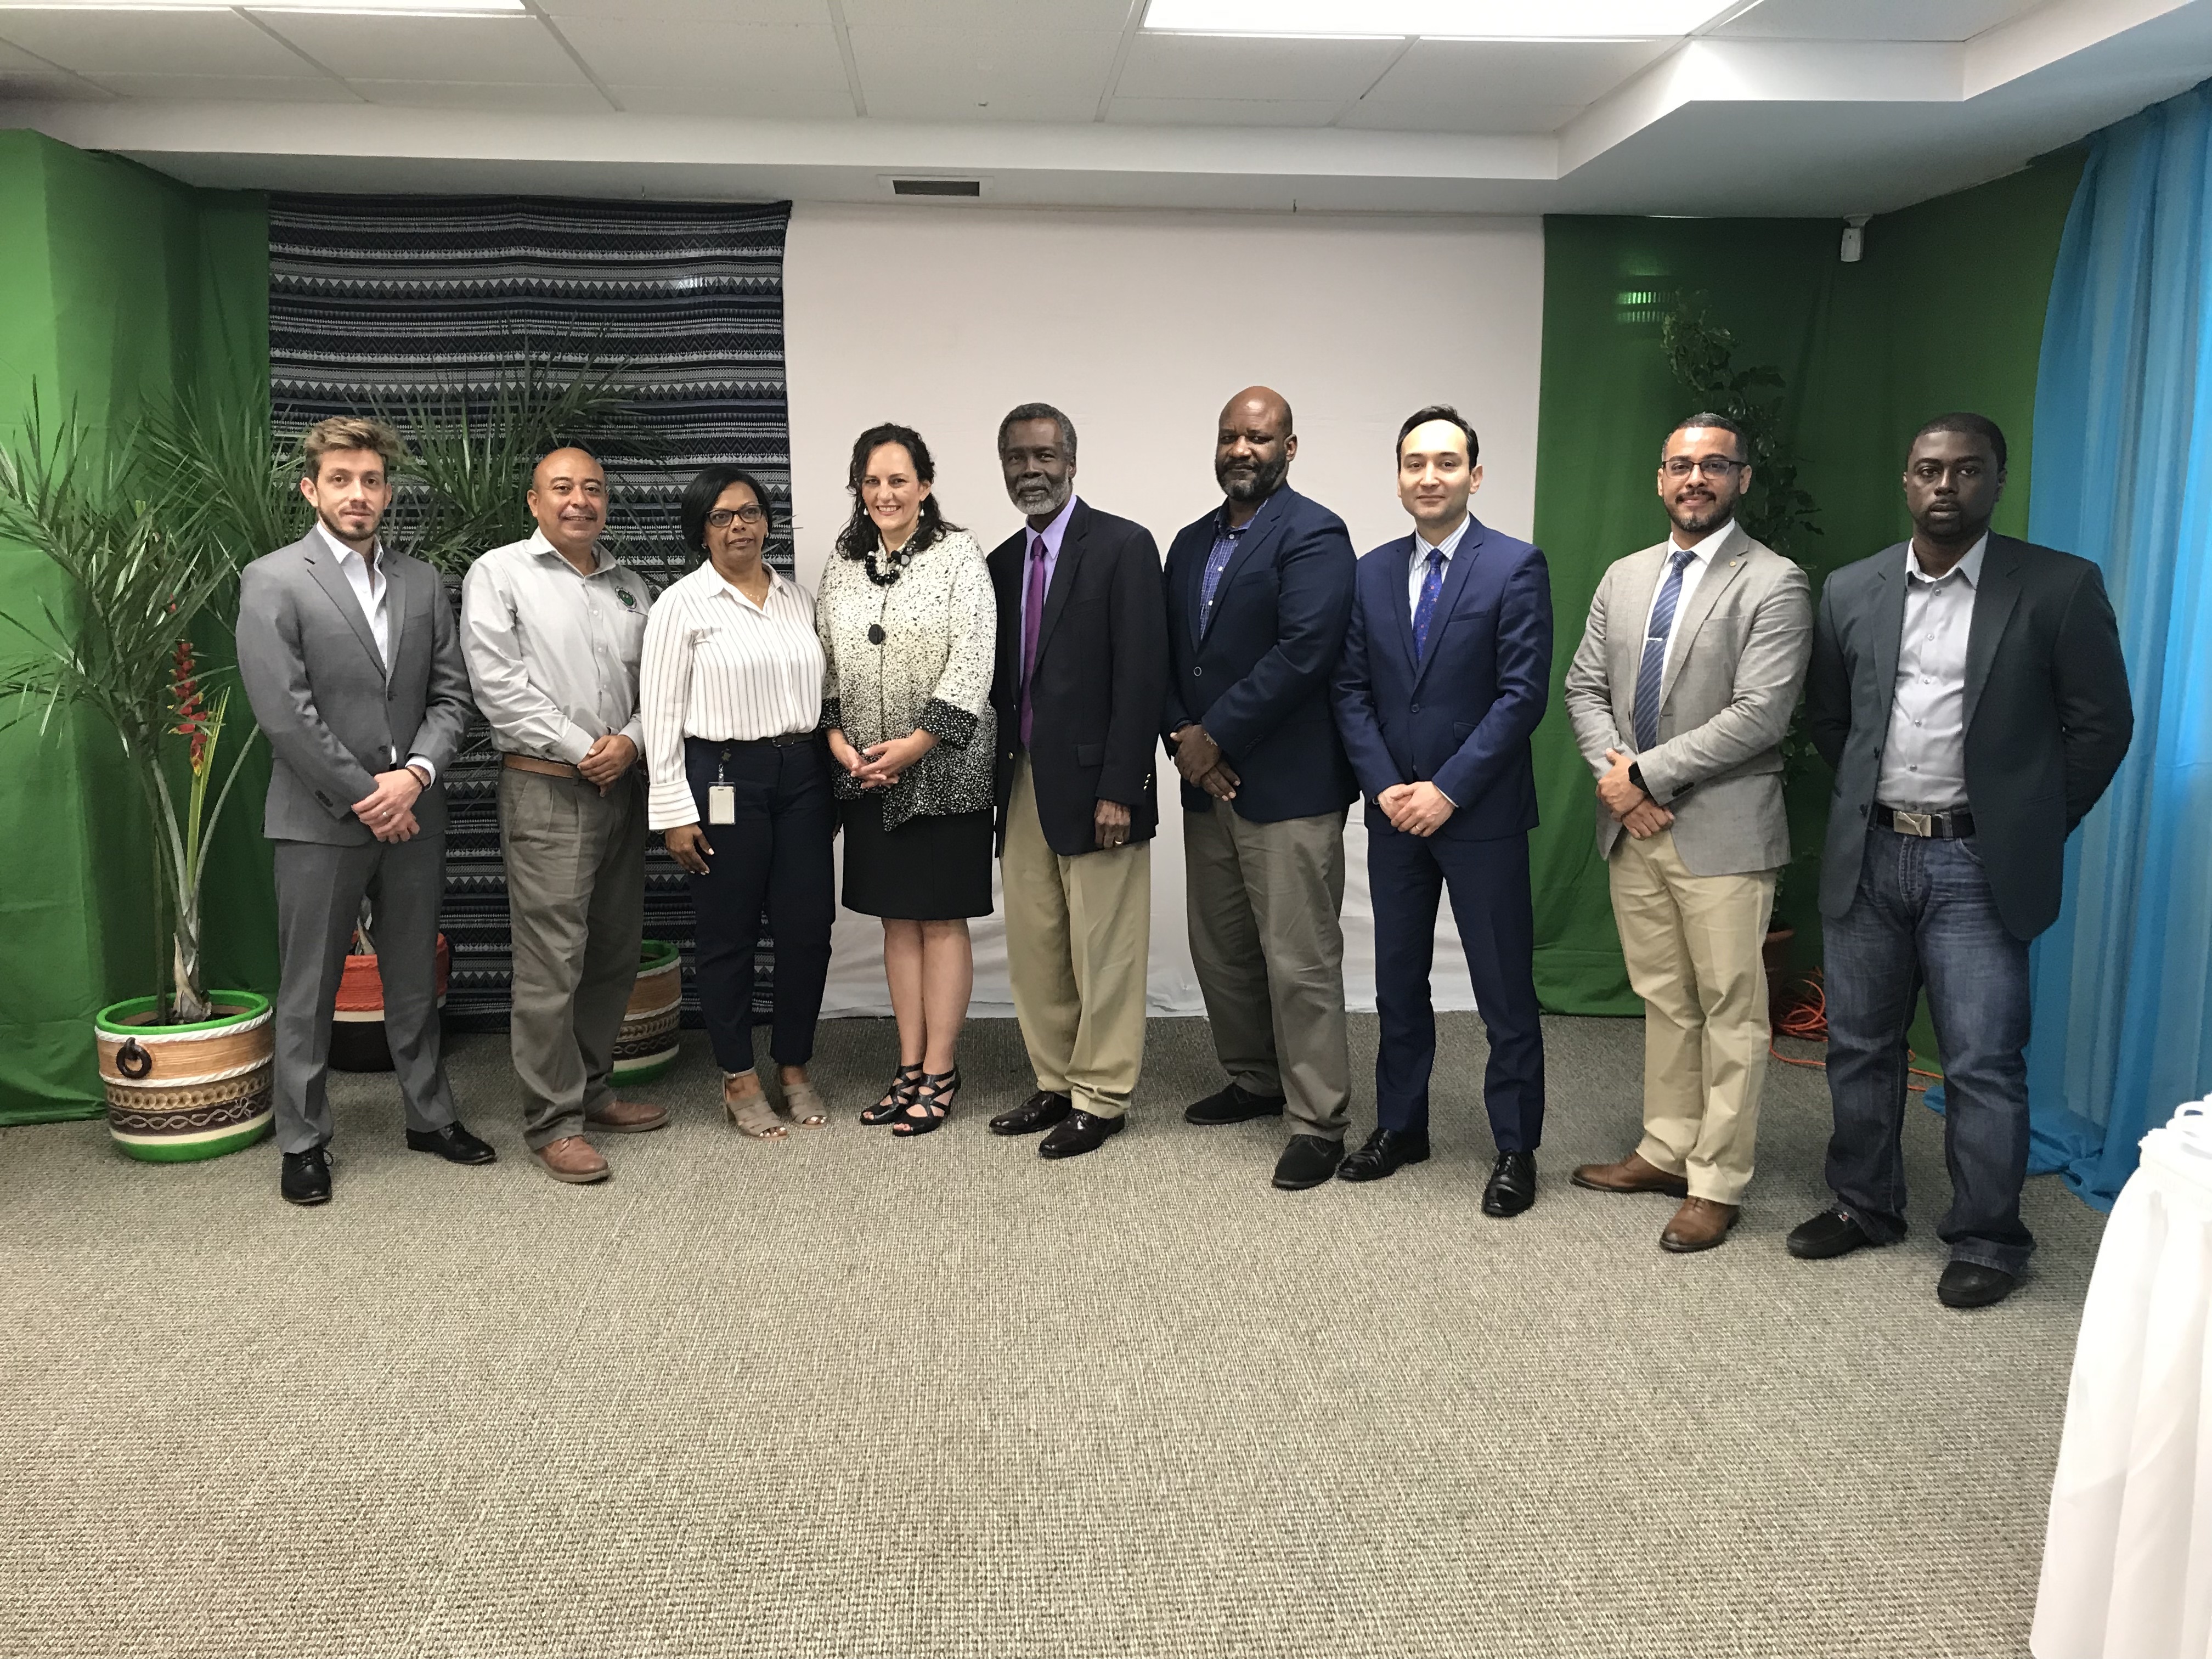 OAS, Trust of the Americas and Belize Chamber of Commerce and Industry Host Roundtable: “Harnessing the Value of Open Data by the Private Sector”.(April 26, 2019)